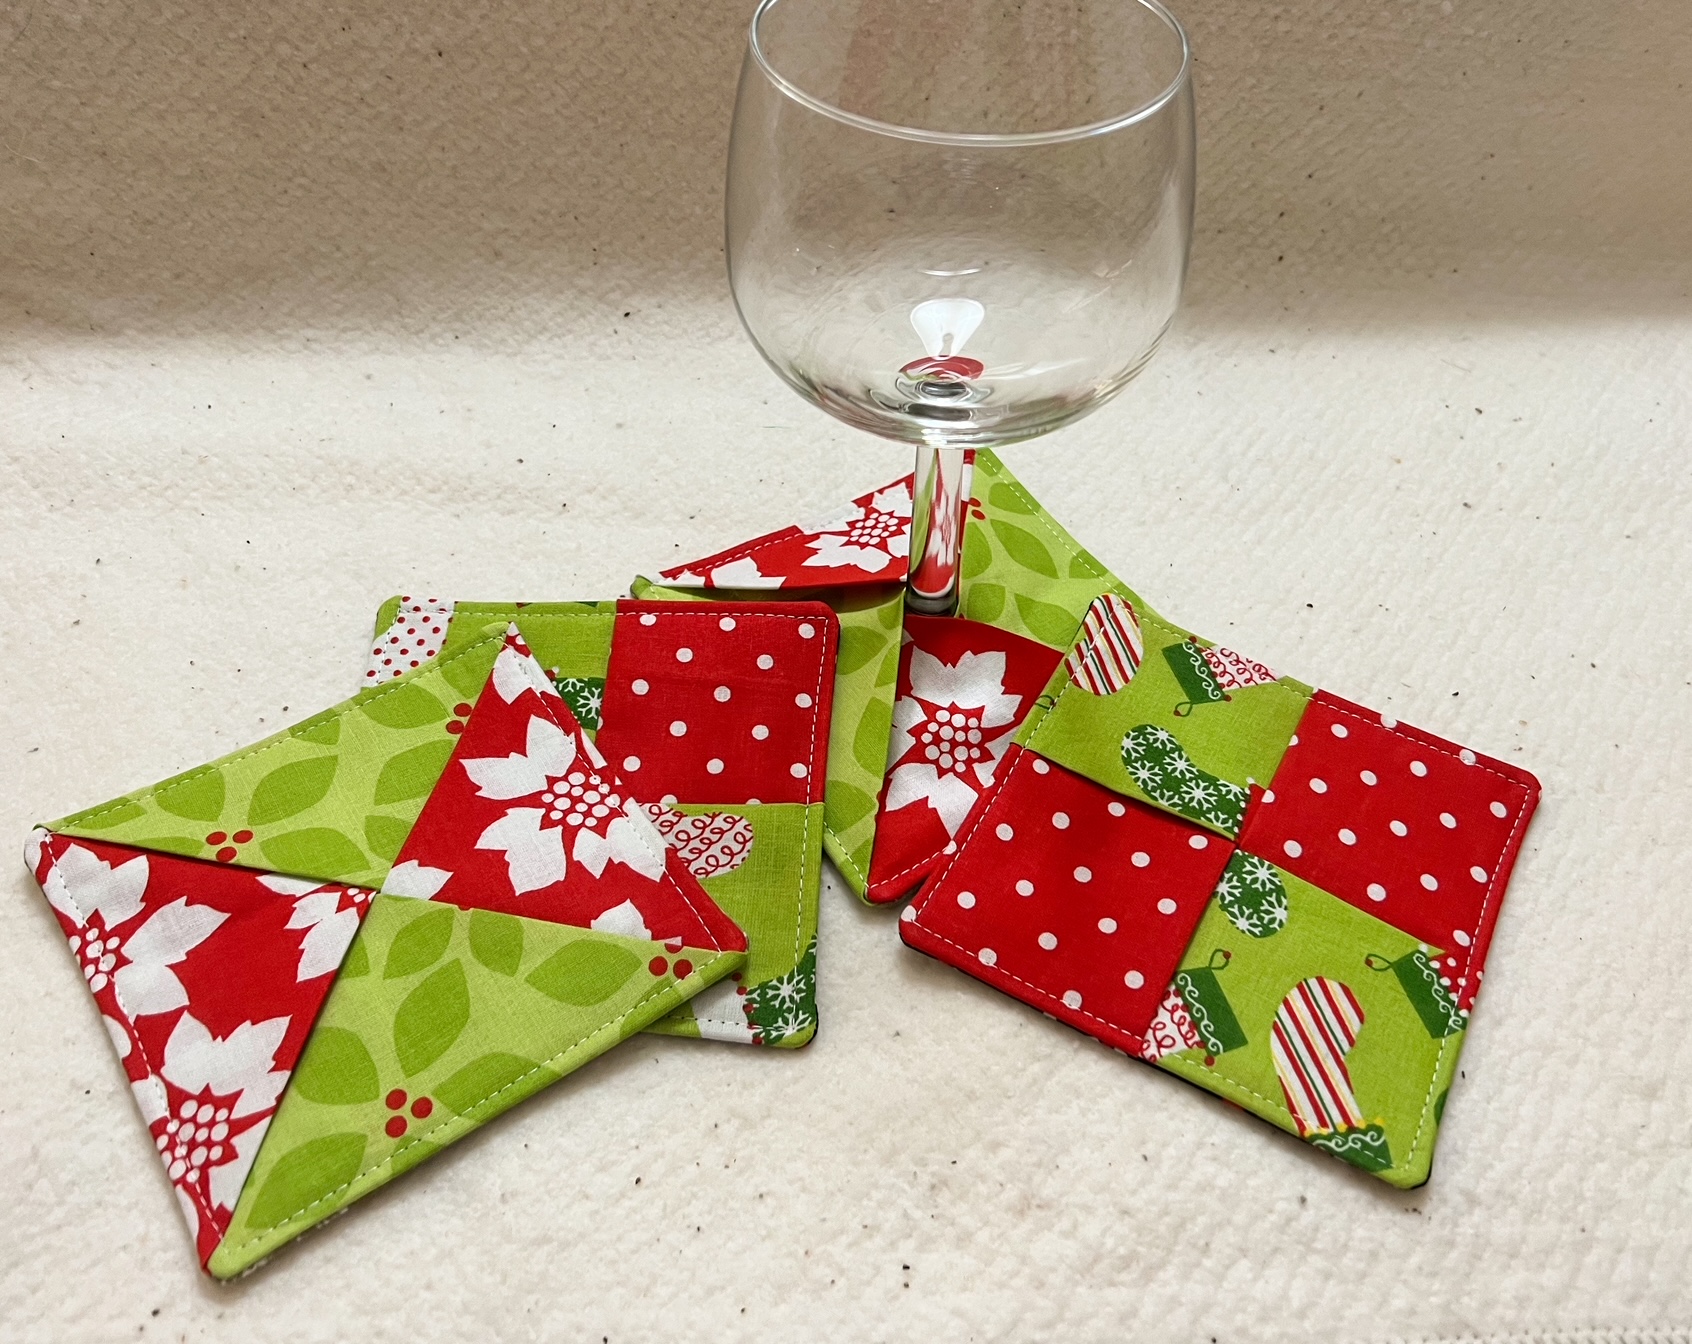 Red and green holiday coasters with wine glass